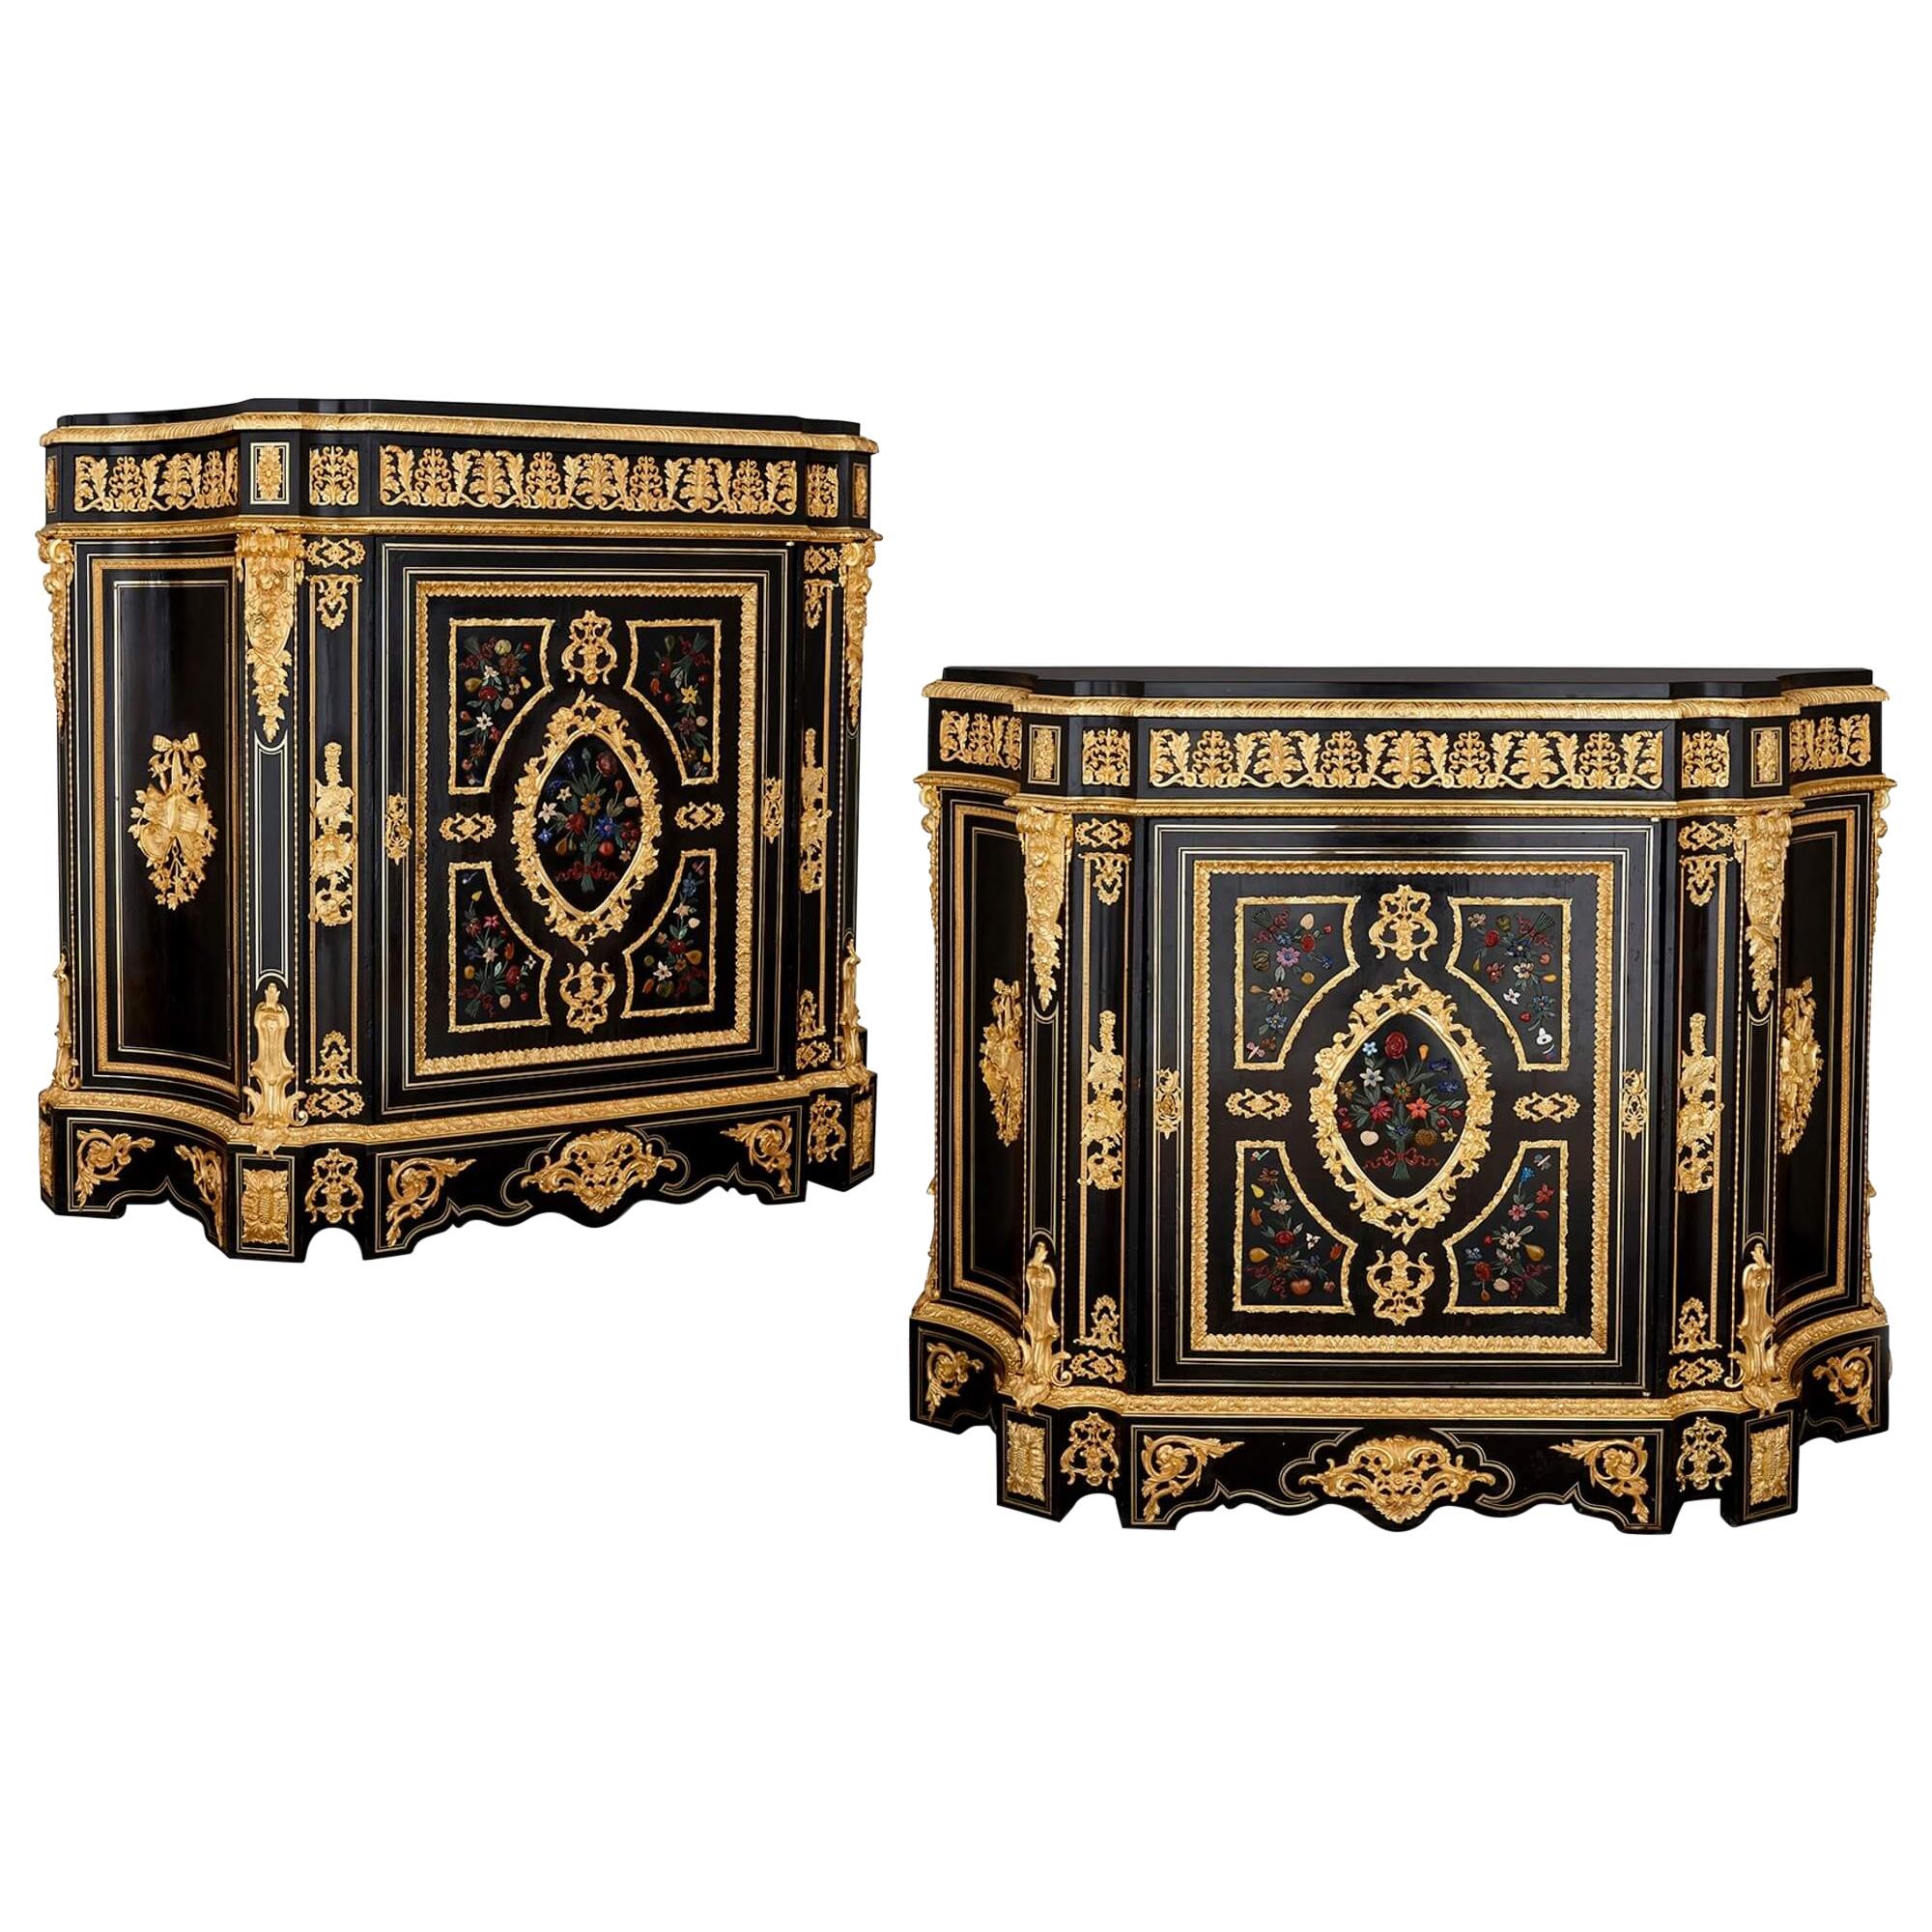 Two Antique Ebonized Wood and Ormolu Cabinets with Hardstone Pietra Dura Inlay